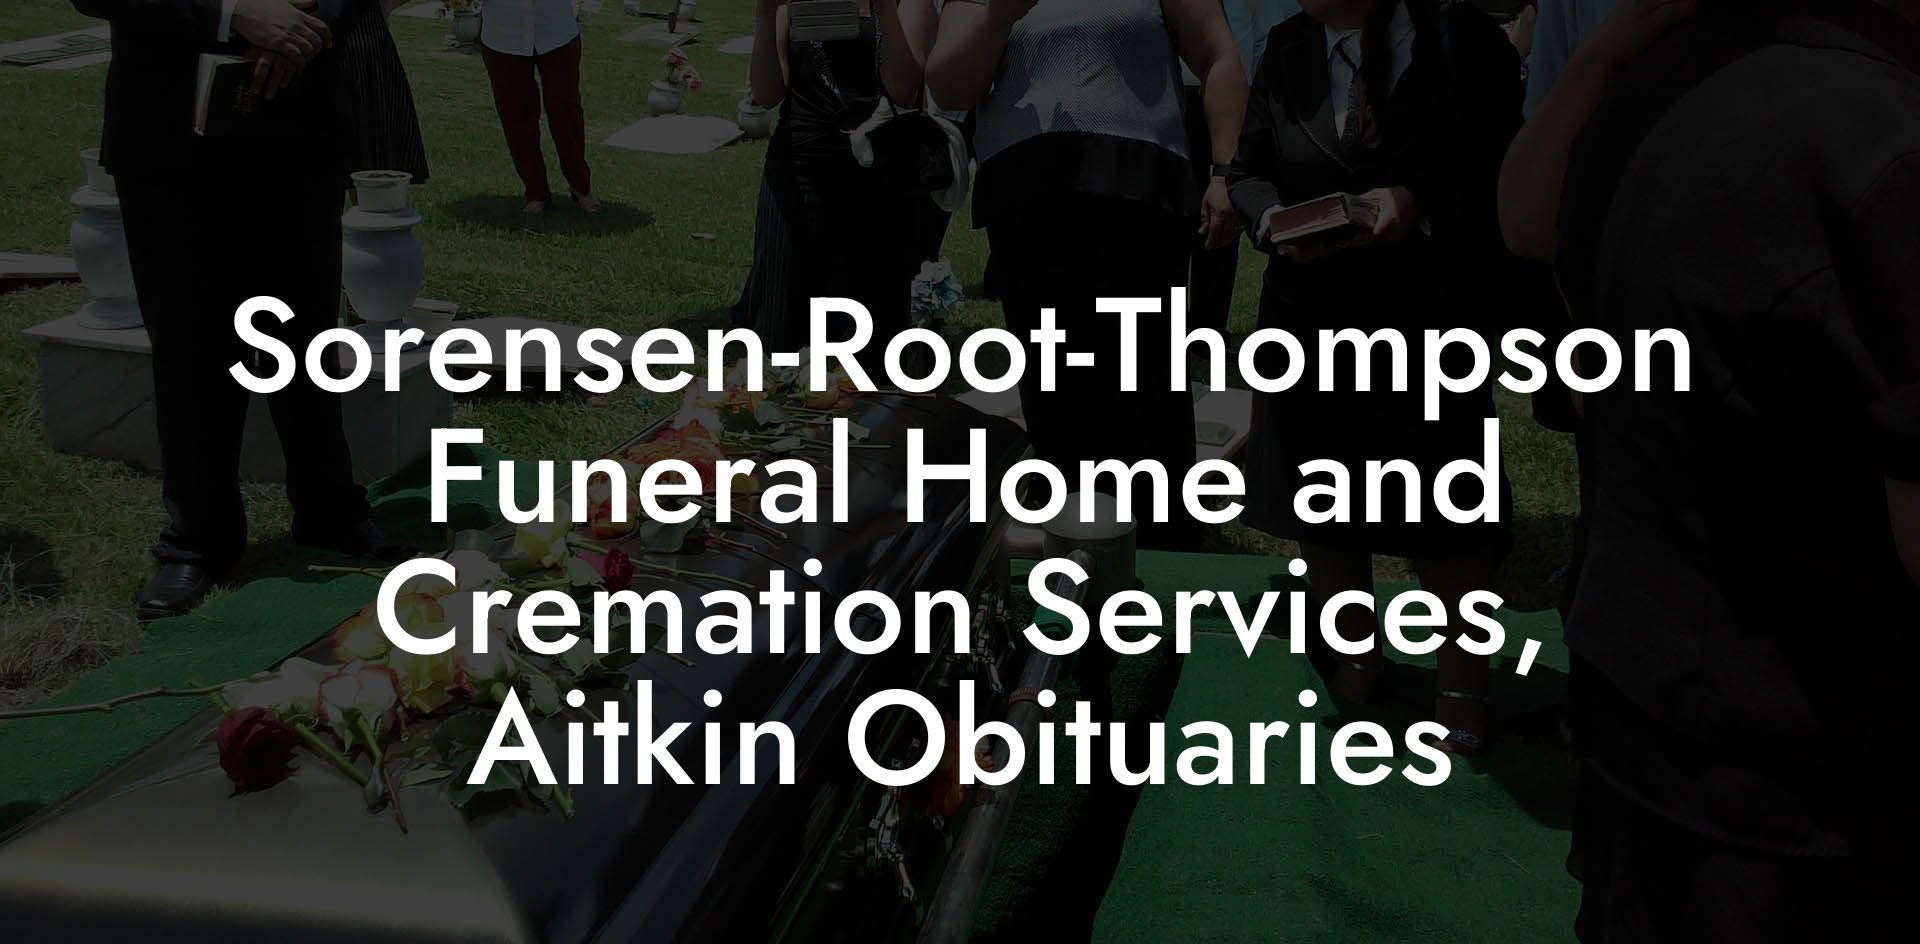 Sorensen-Root-Thompson Funeral Home and Cremation Services, Aitkin Obituaries